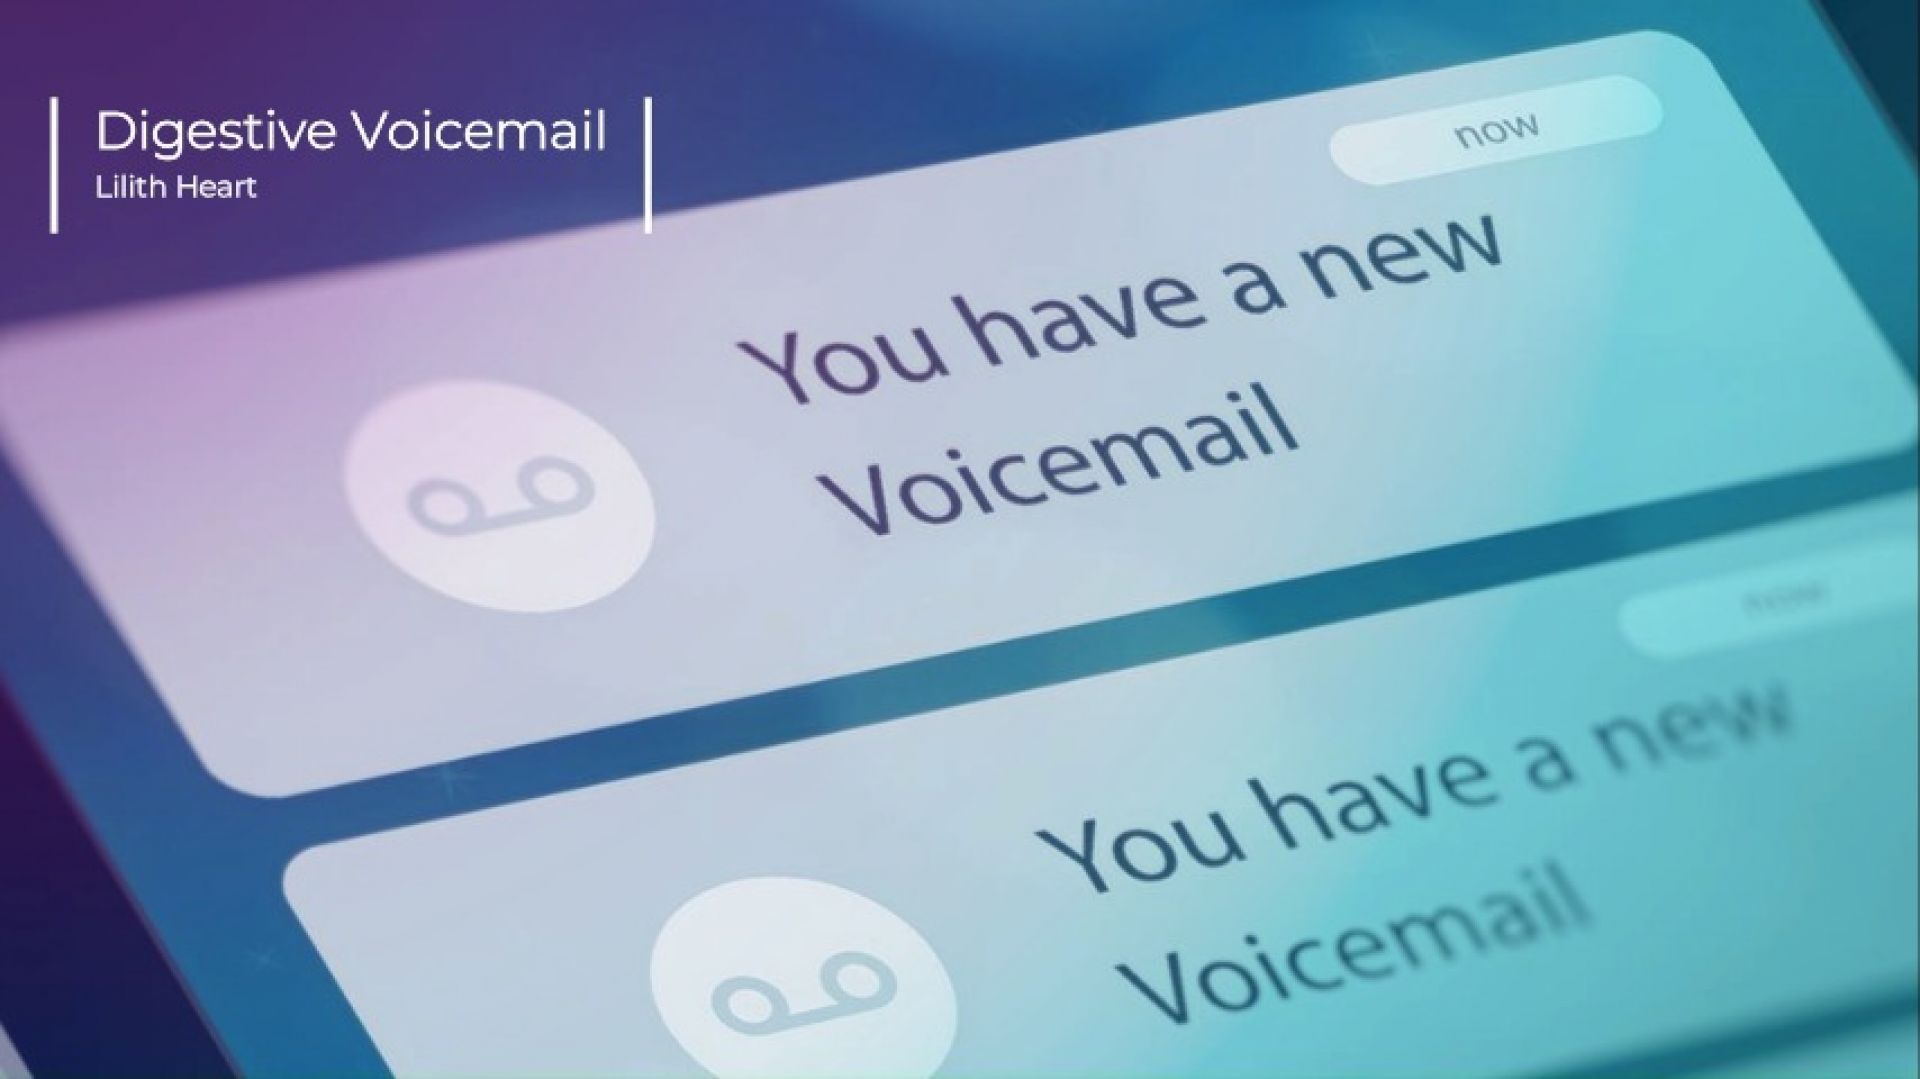 Digestive Voicemail